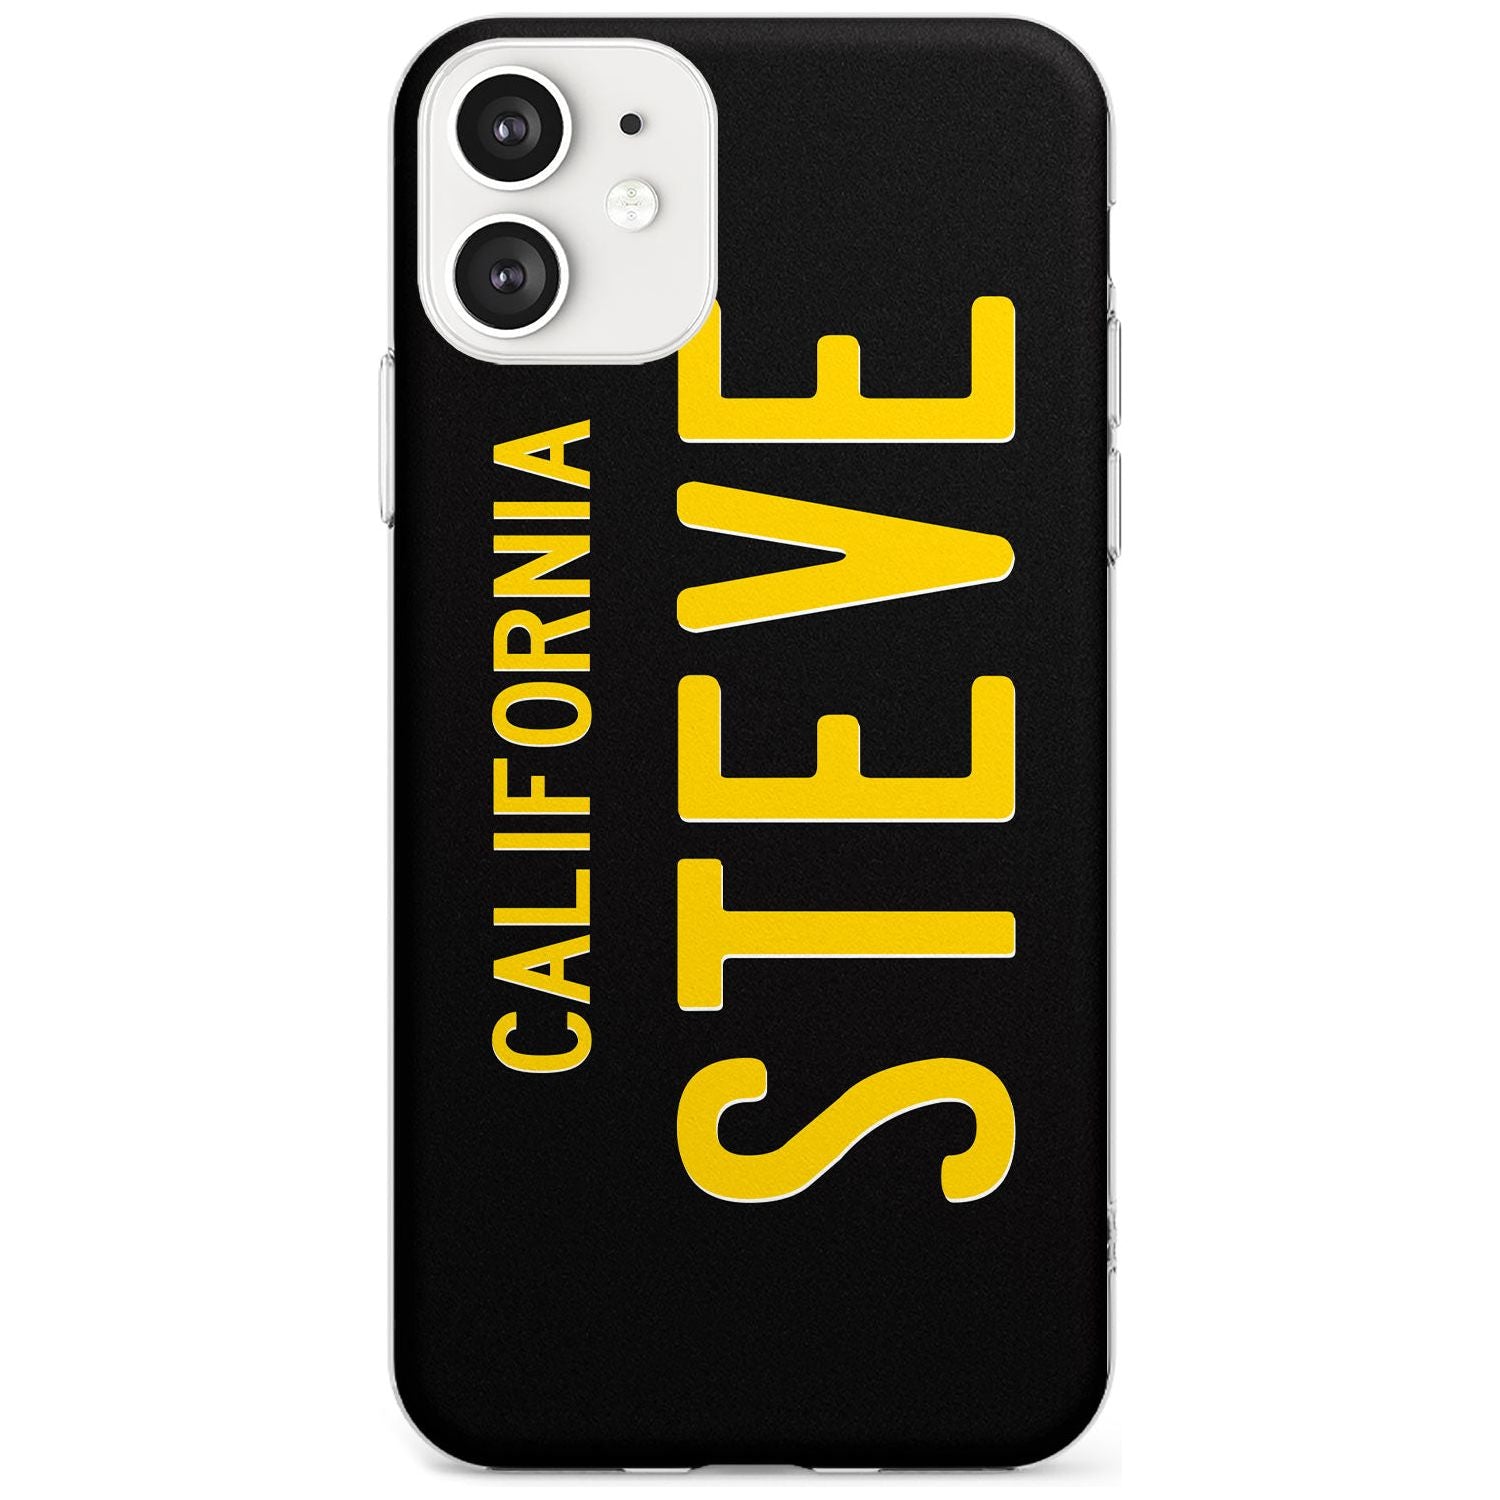 Vintage California License Plate Black Impact Phone Case for iPhone 11